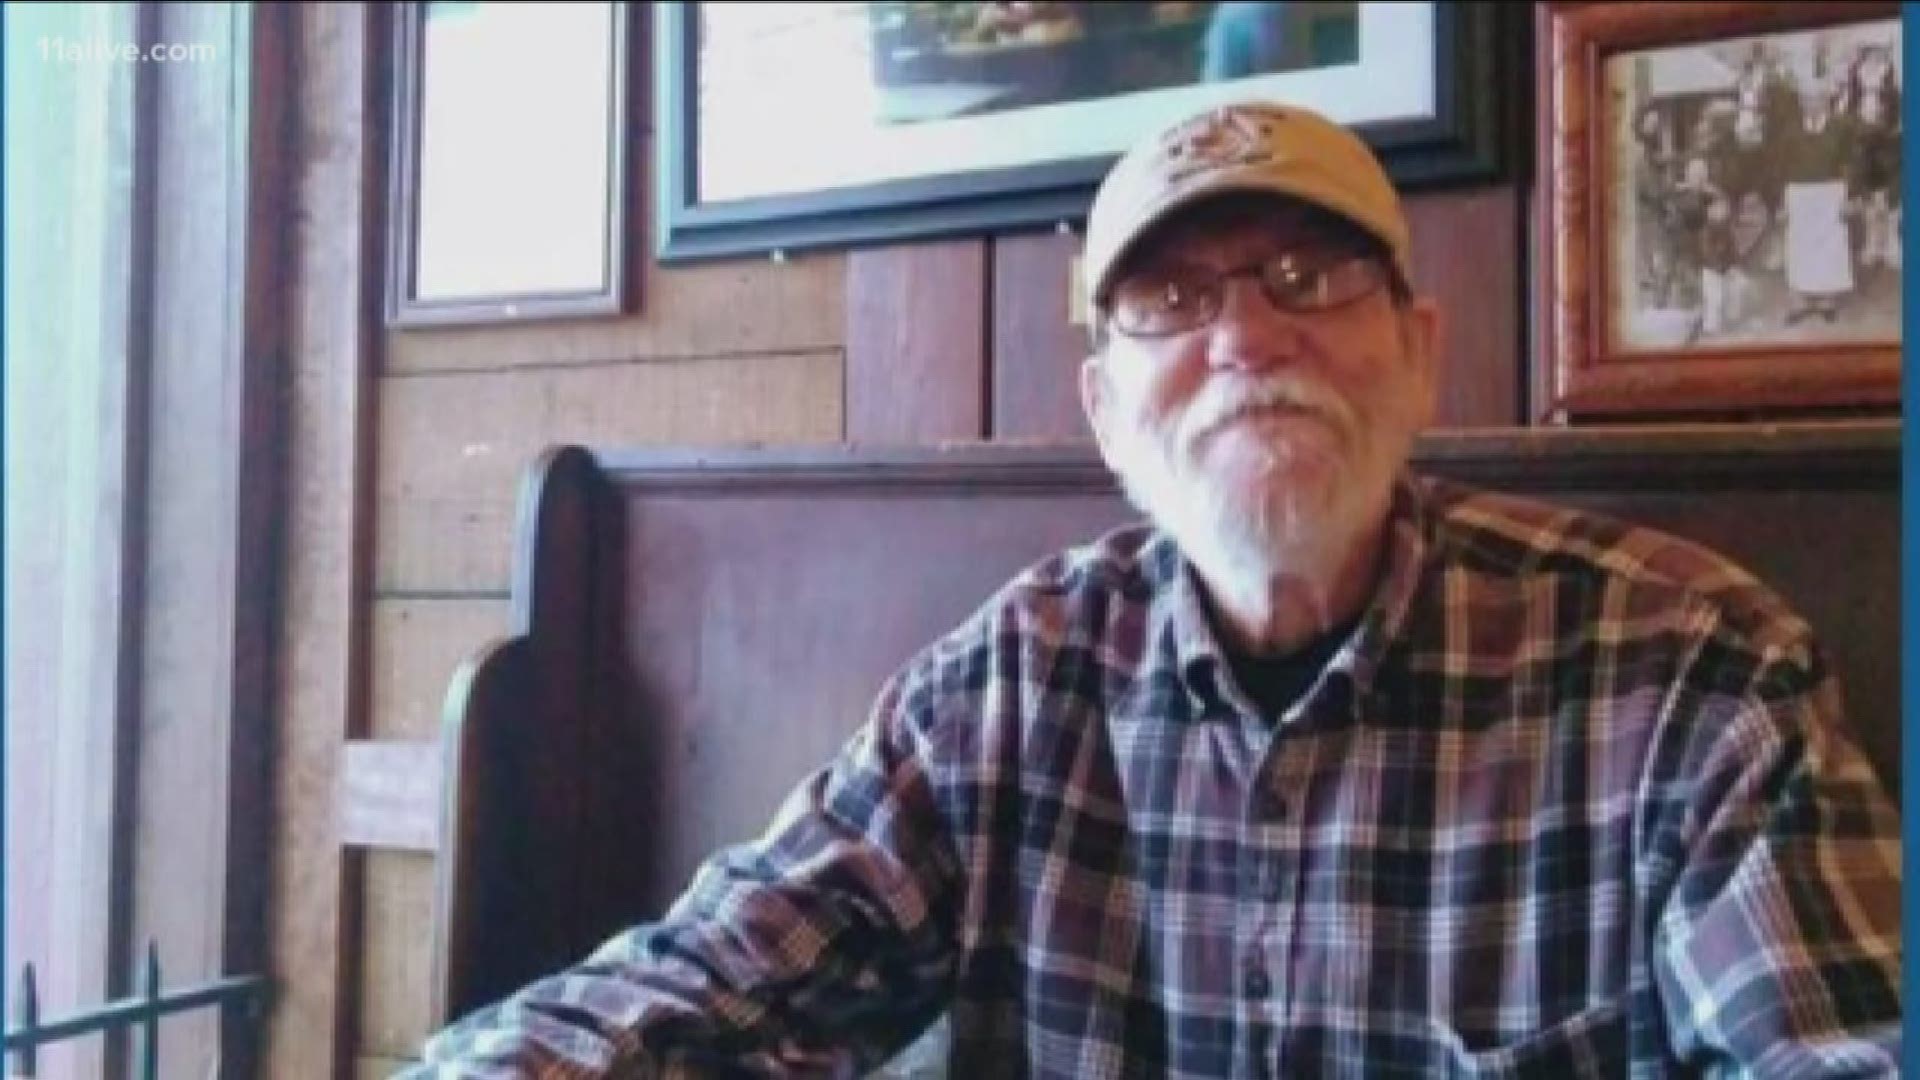 A fixture at the neighborhood bar for nearly 50 years has died following a short battle with kidney cancer.